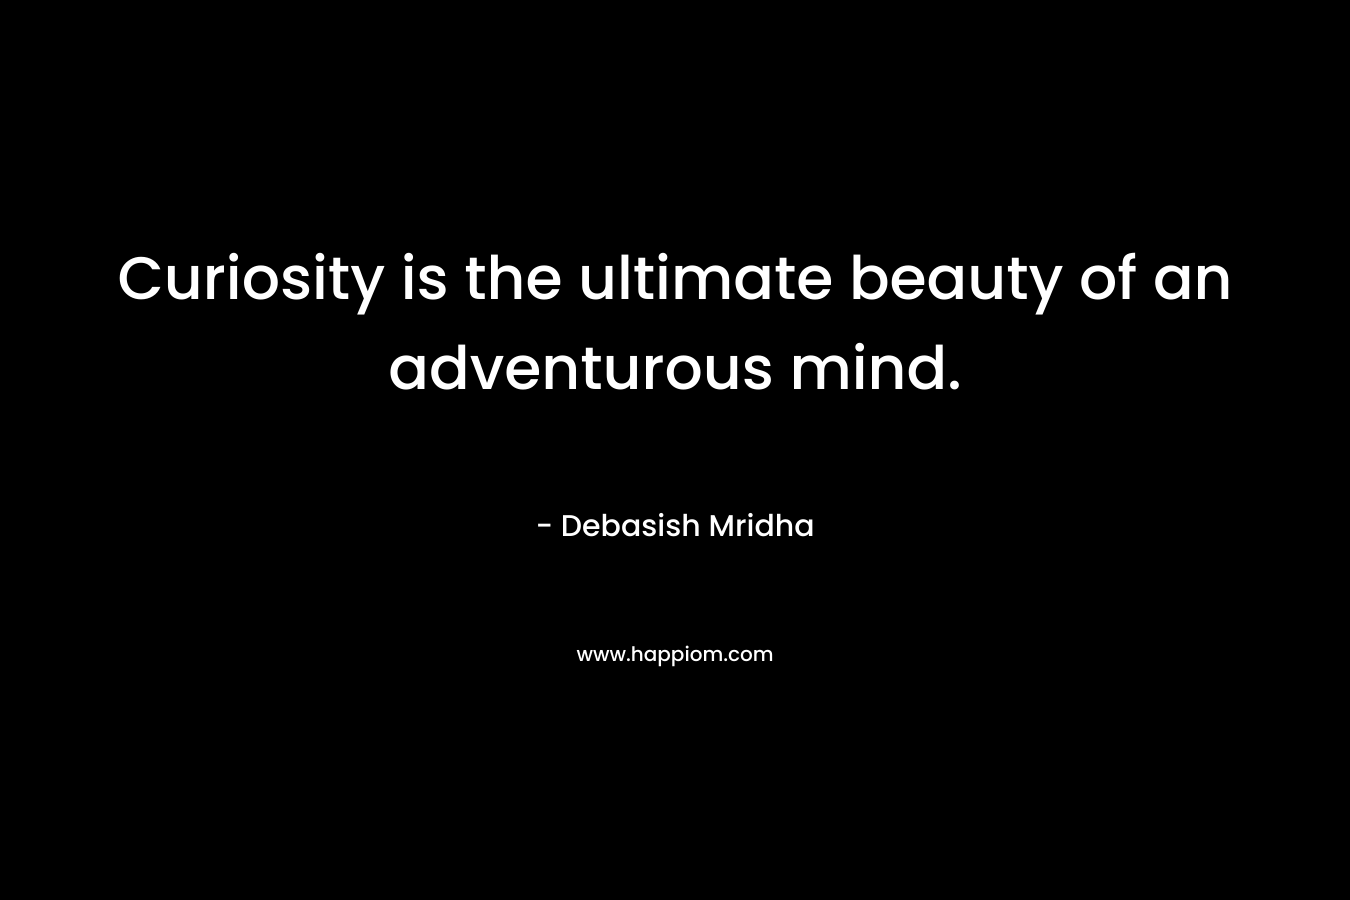 Curiosity is the ultimate beauty of an adventurous mind.